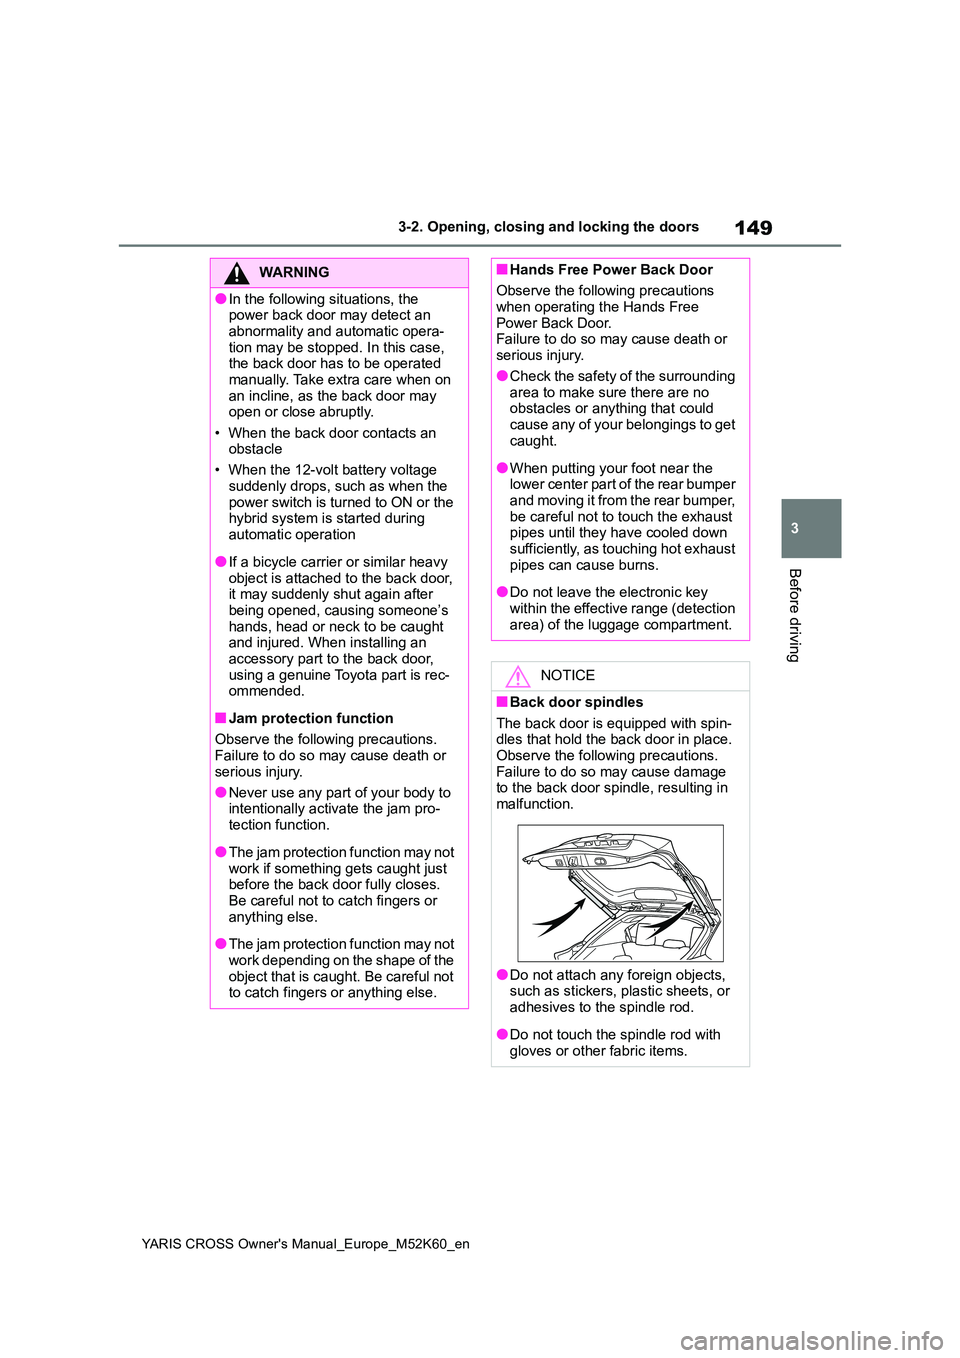 TOYOTA YARIS CROSS 2021  Owners Manual 149
3
YARIS CROSS Owner's Manual_Europe_M52K60_en
3-2. Opening, closing and locking the doors
Before driving
WARNING
●In the following situations, the  power back door may detect an  
abnormalit